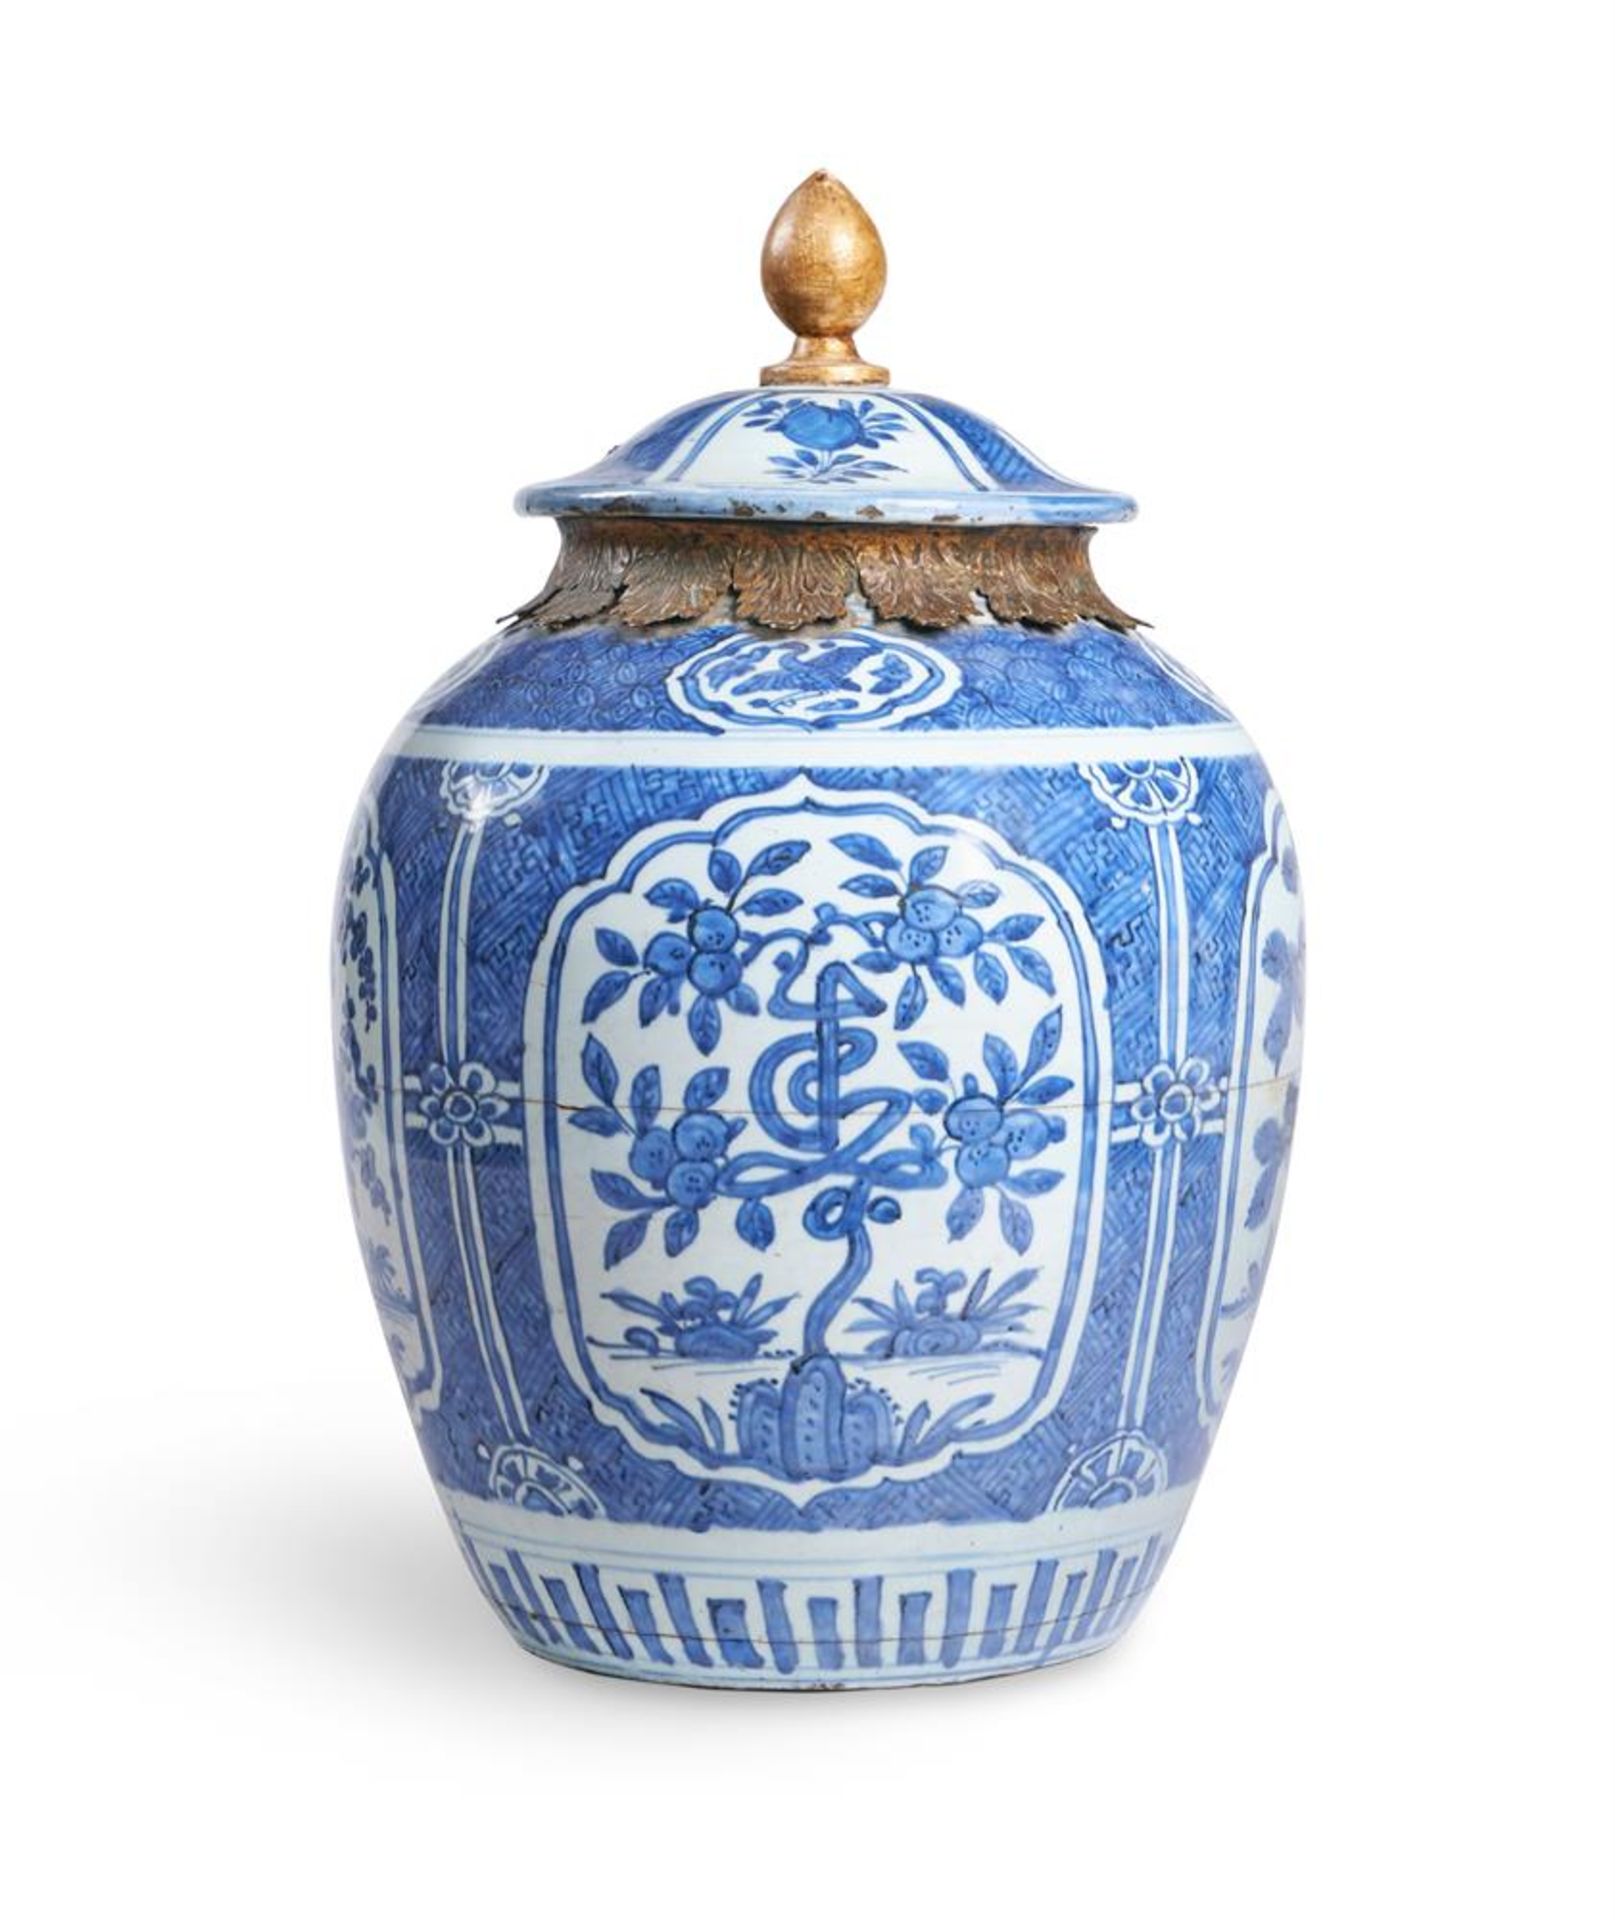 A BLUE AND WHITE LARGE VASE AND COVER, CHINESE, 17TH CENTURY